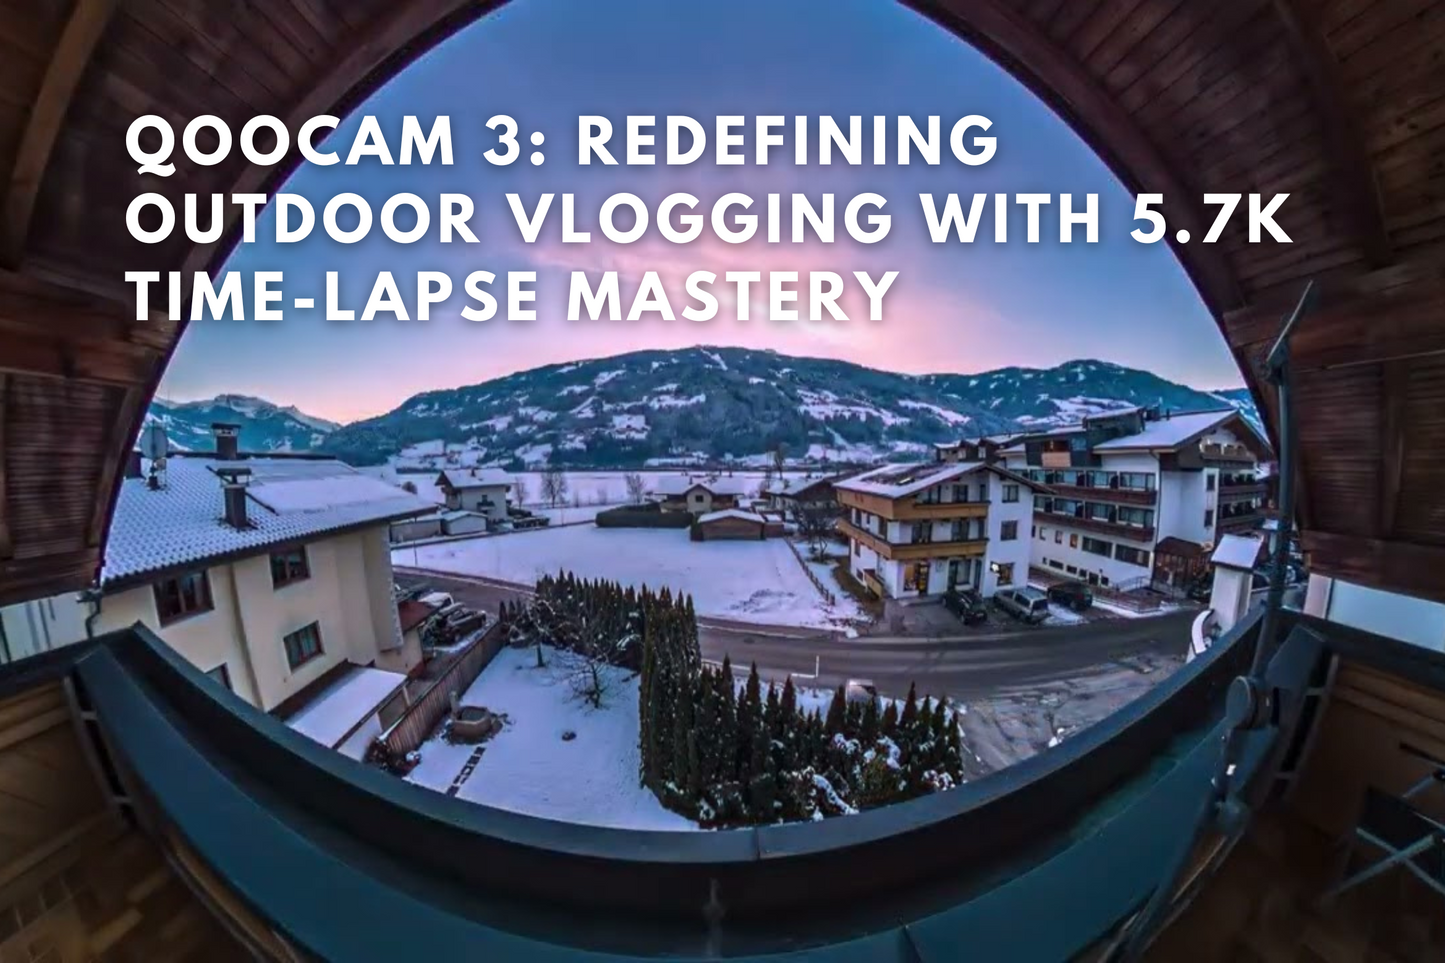 QooCam 3: Redefining Outdoor Vlogging with 5.7K Time-Lapse Mastery